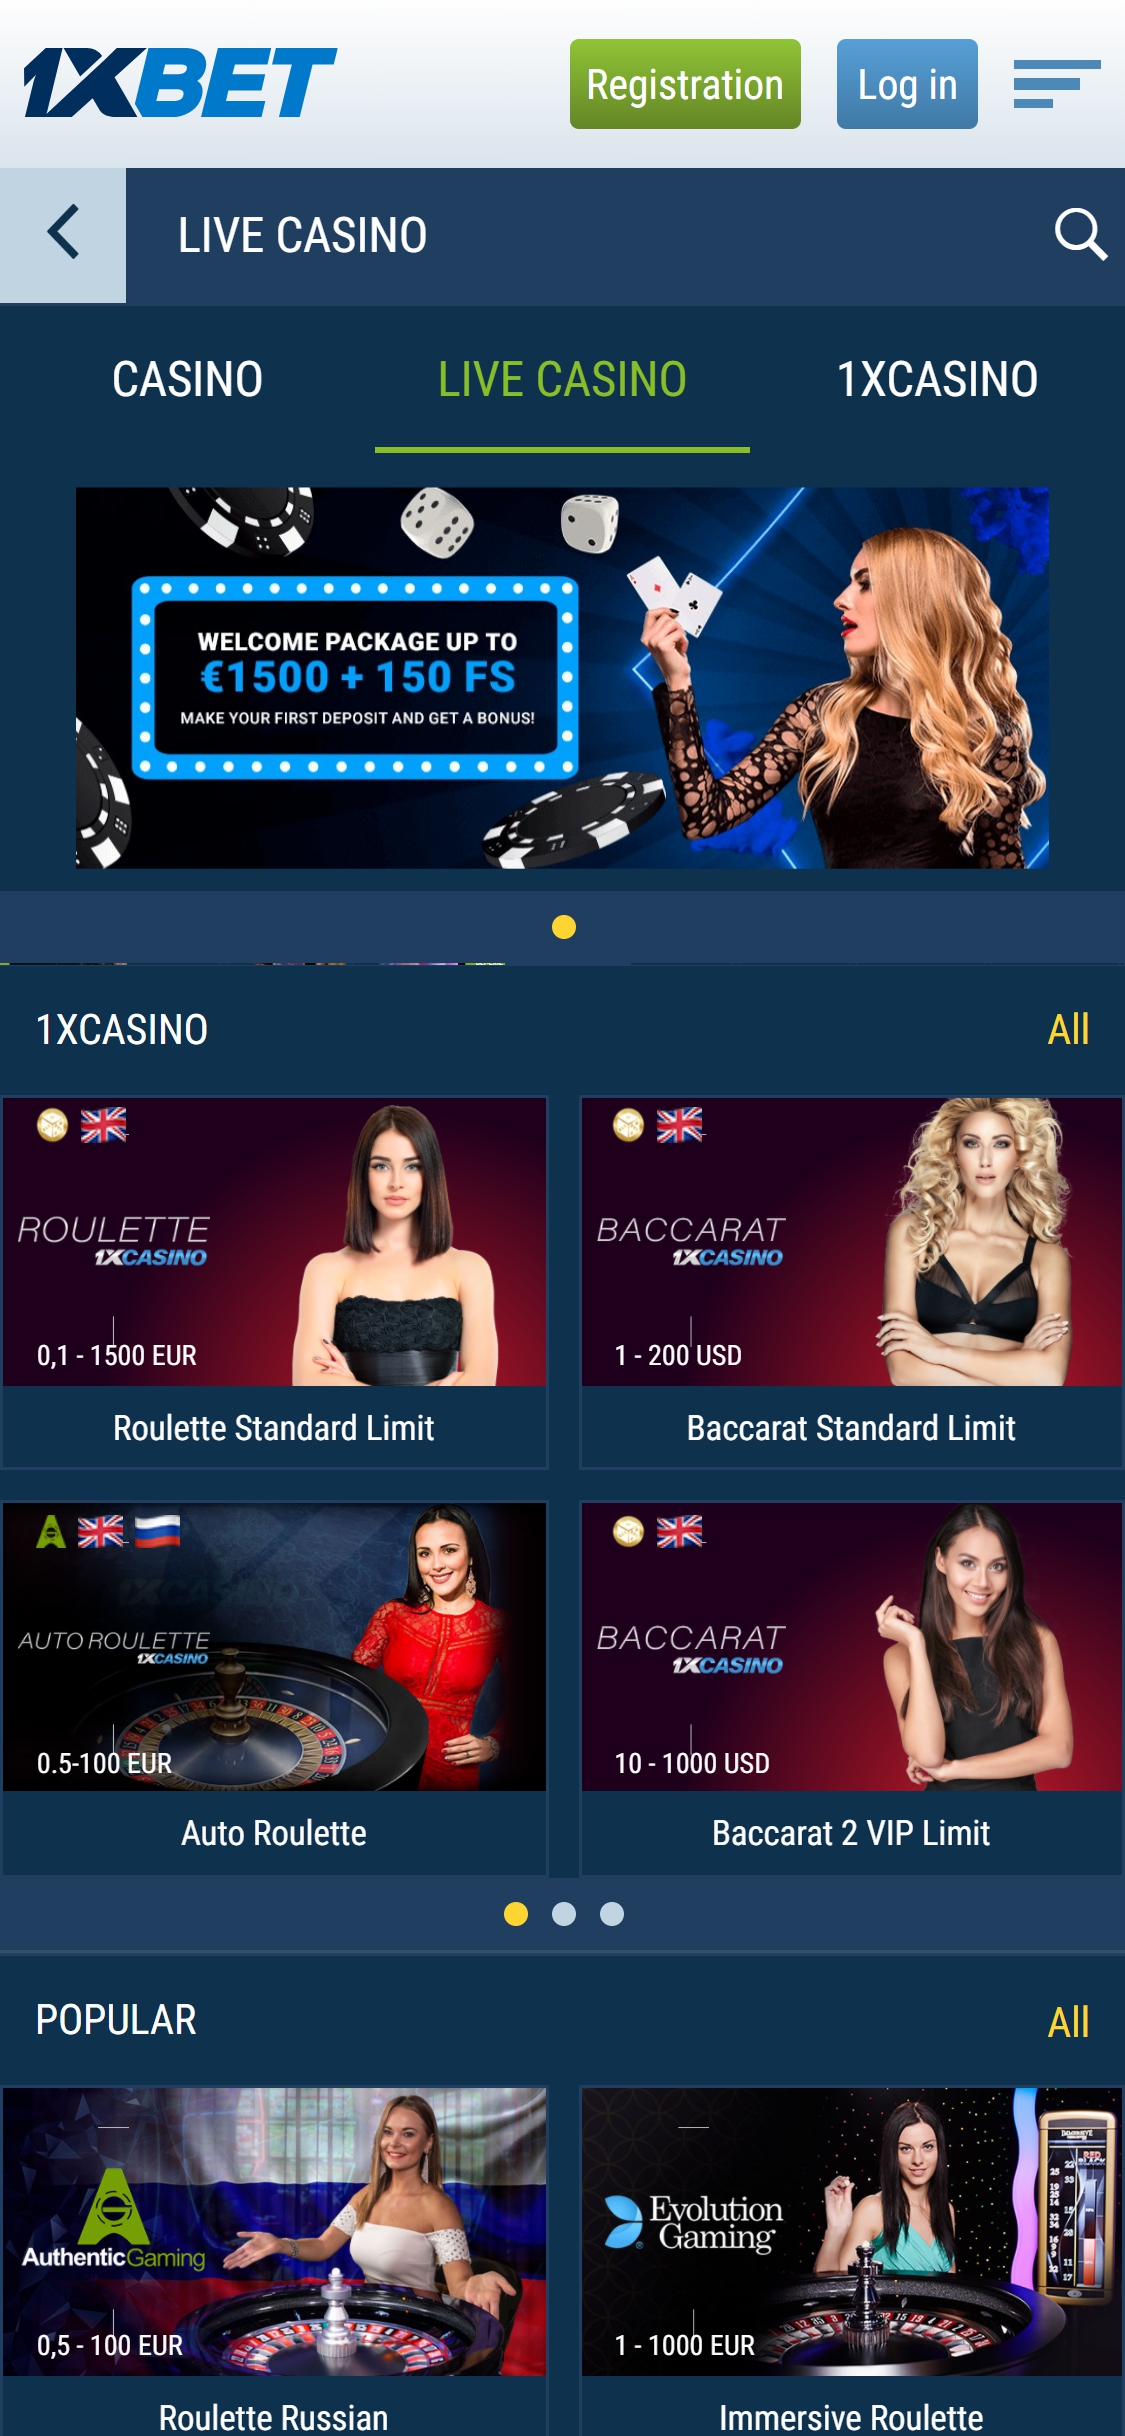 1Xbet Casino Mobile Live Dealer Games Review